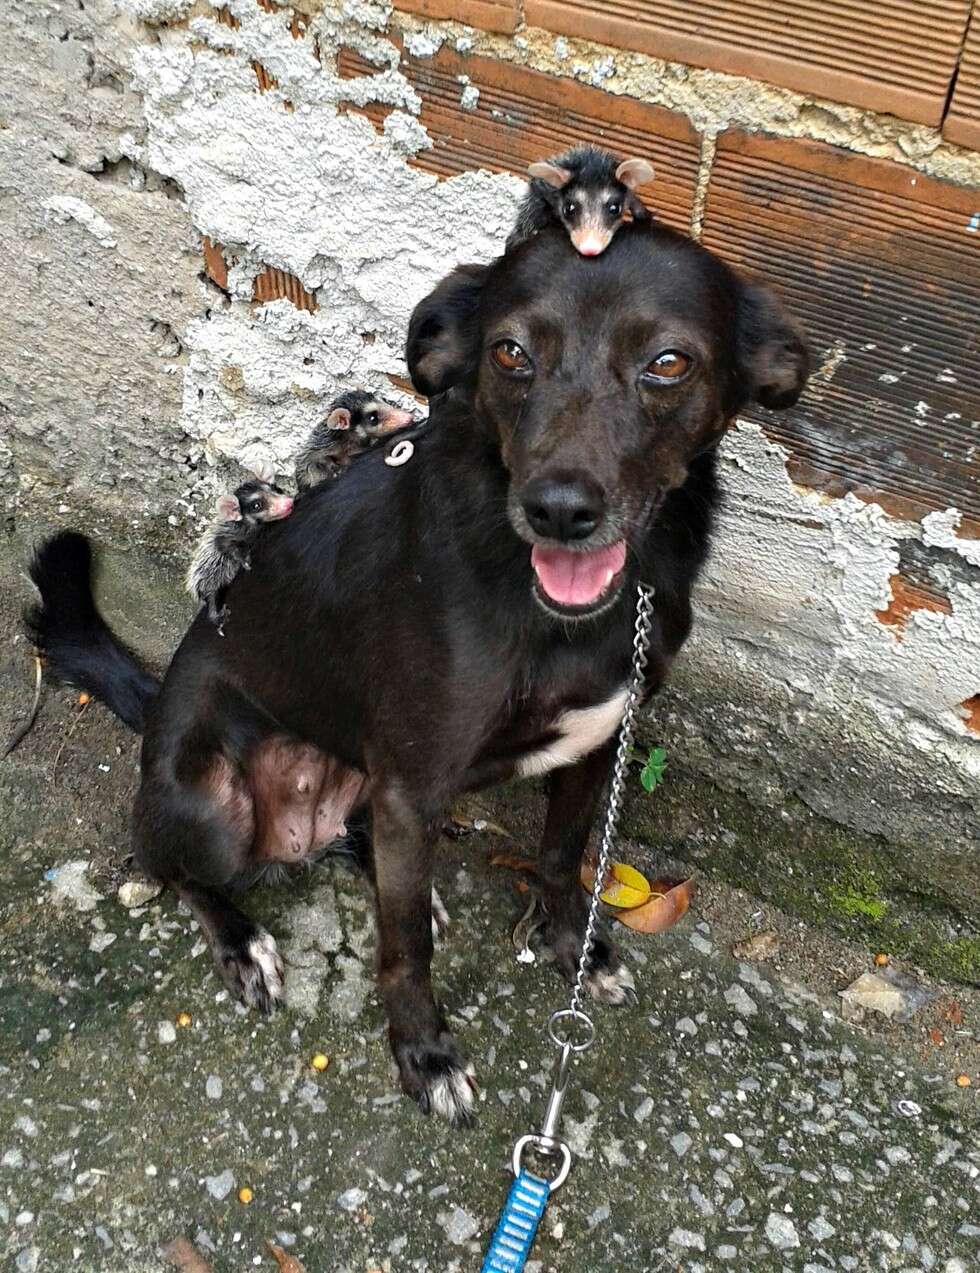 Orphaned opossums find an unlikely mother in a caring dog who carries them on her back